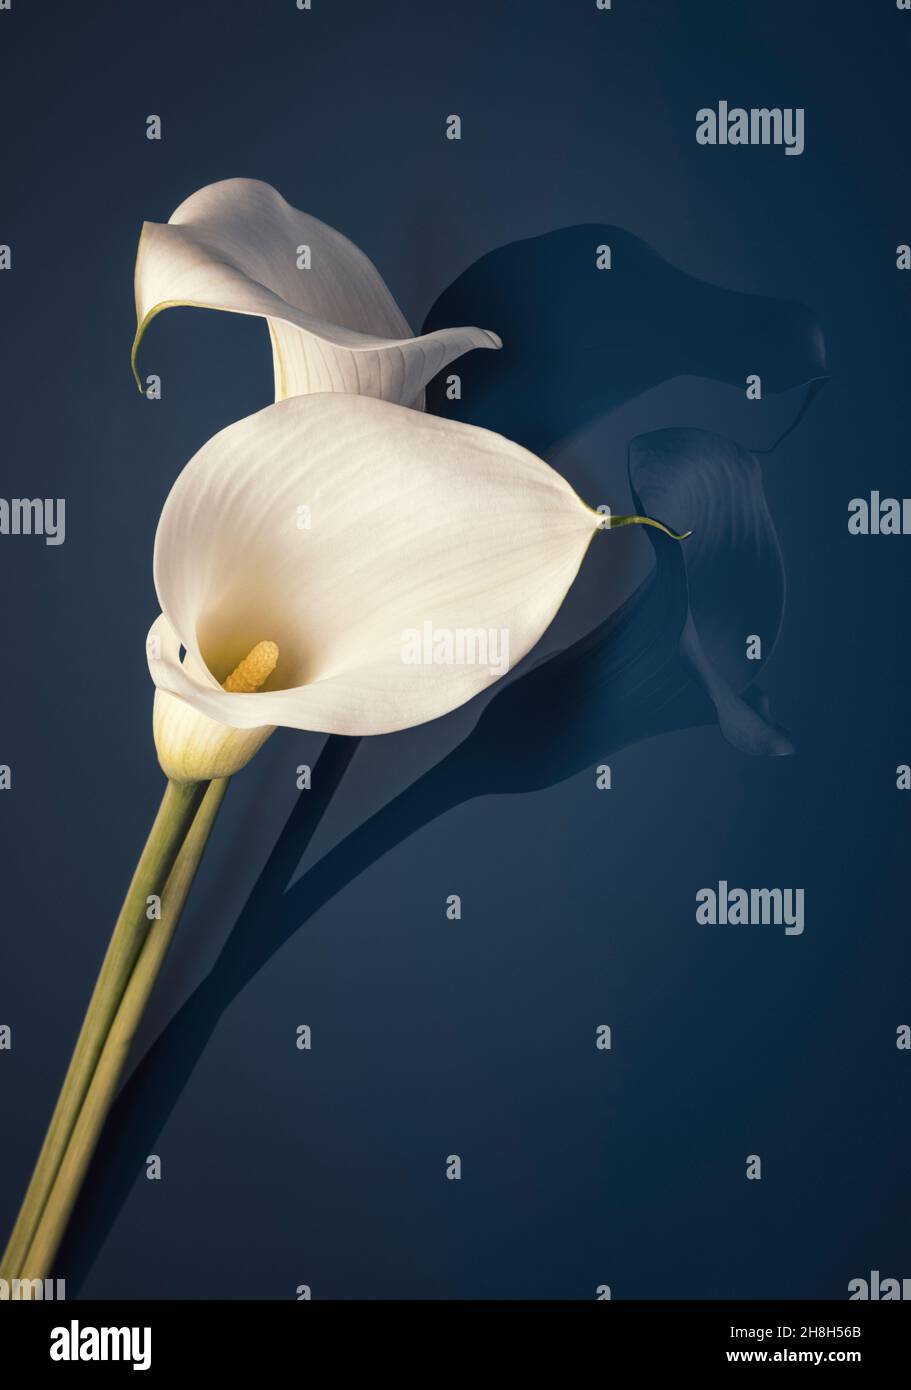 Two large white Calla lilies on reflective surface Stock Photo